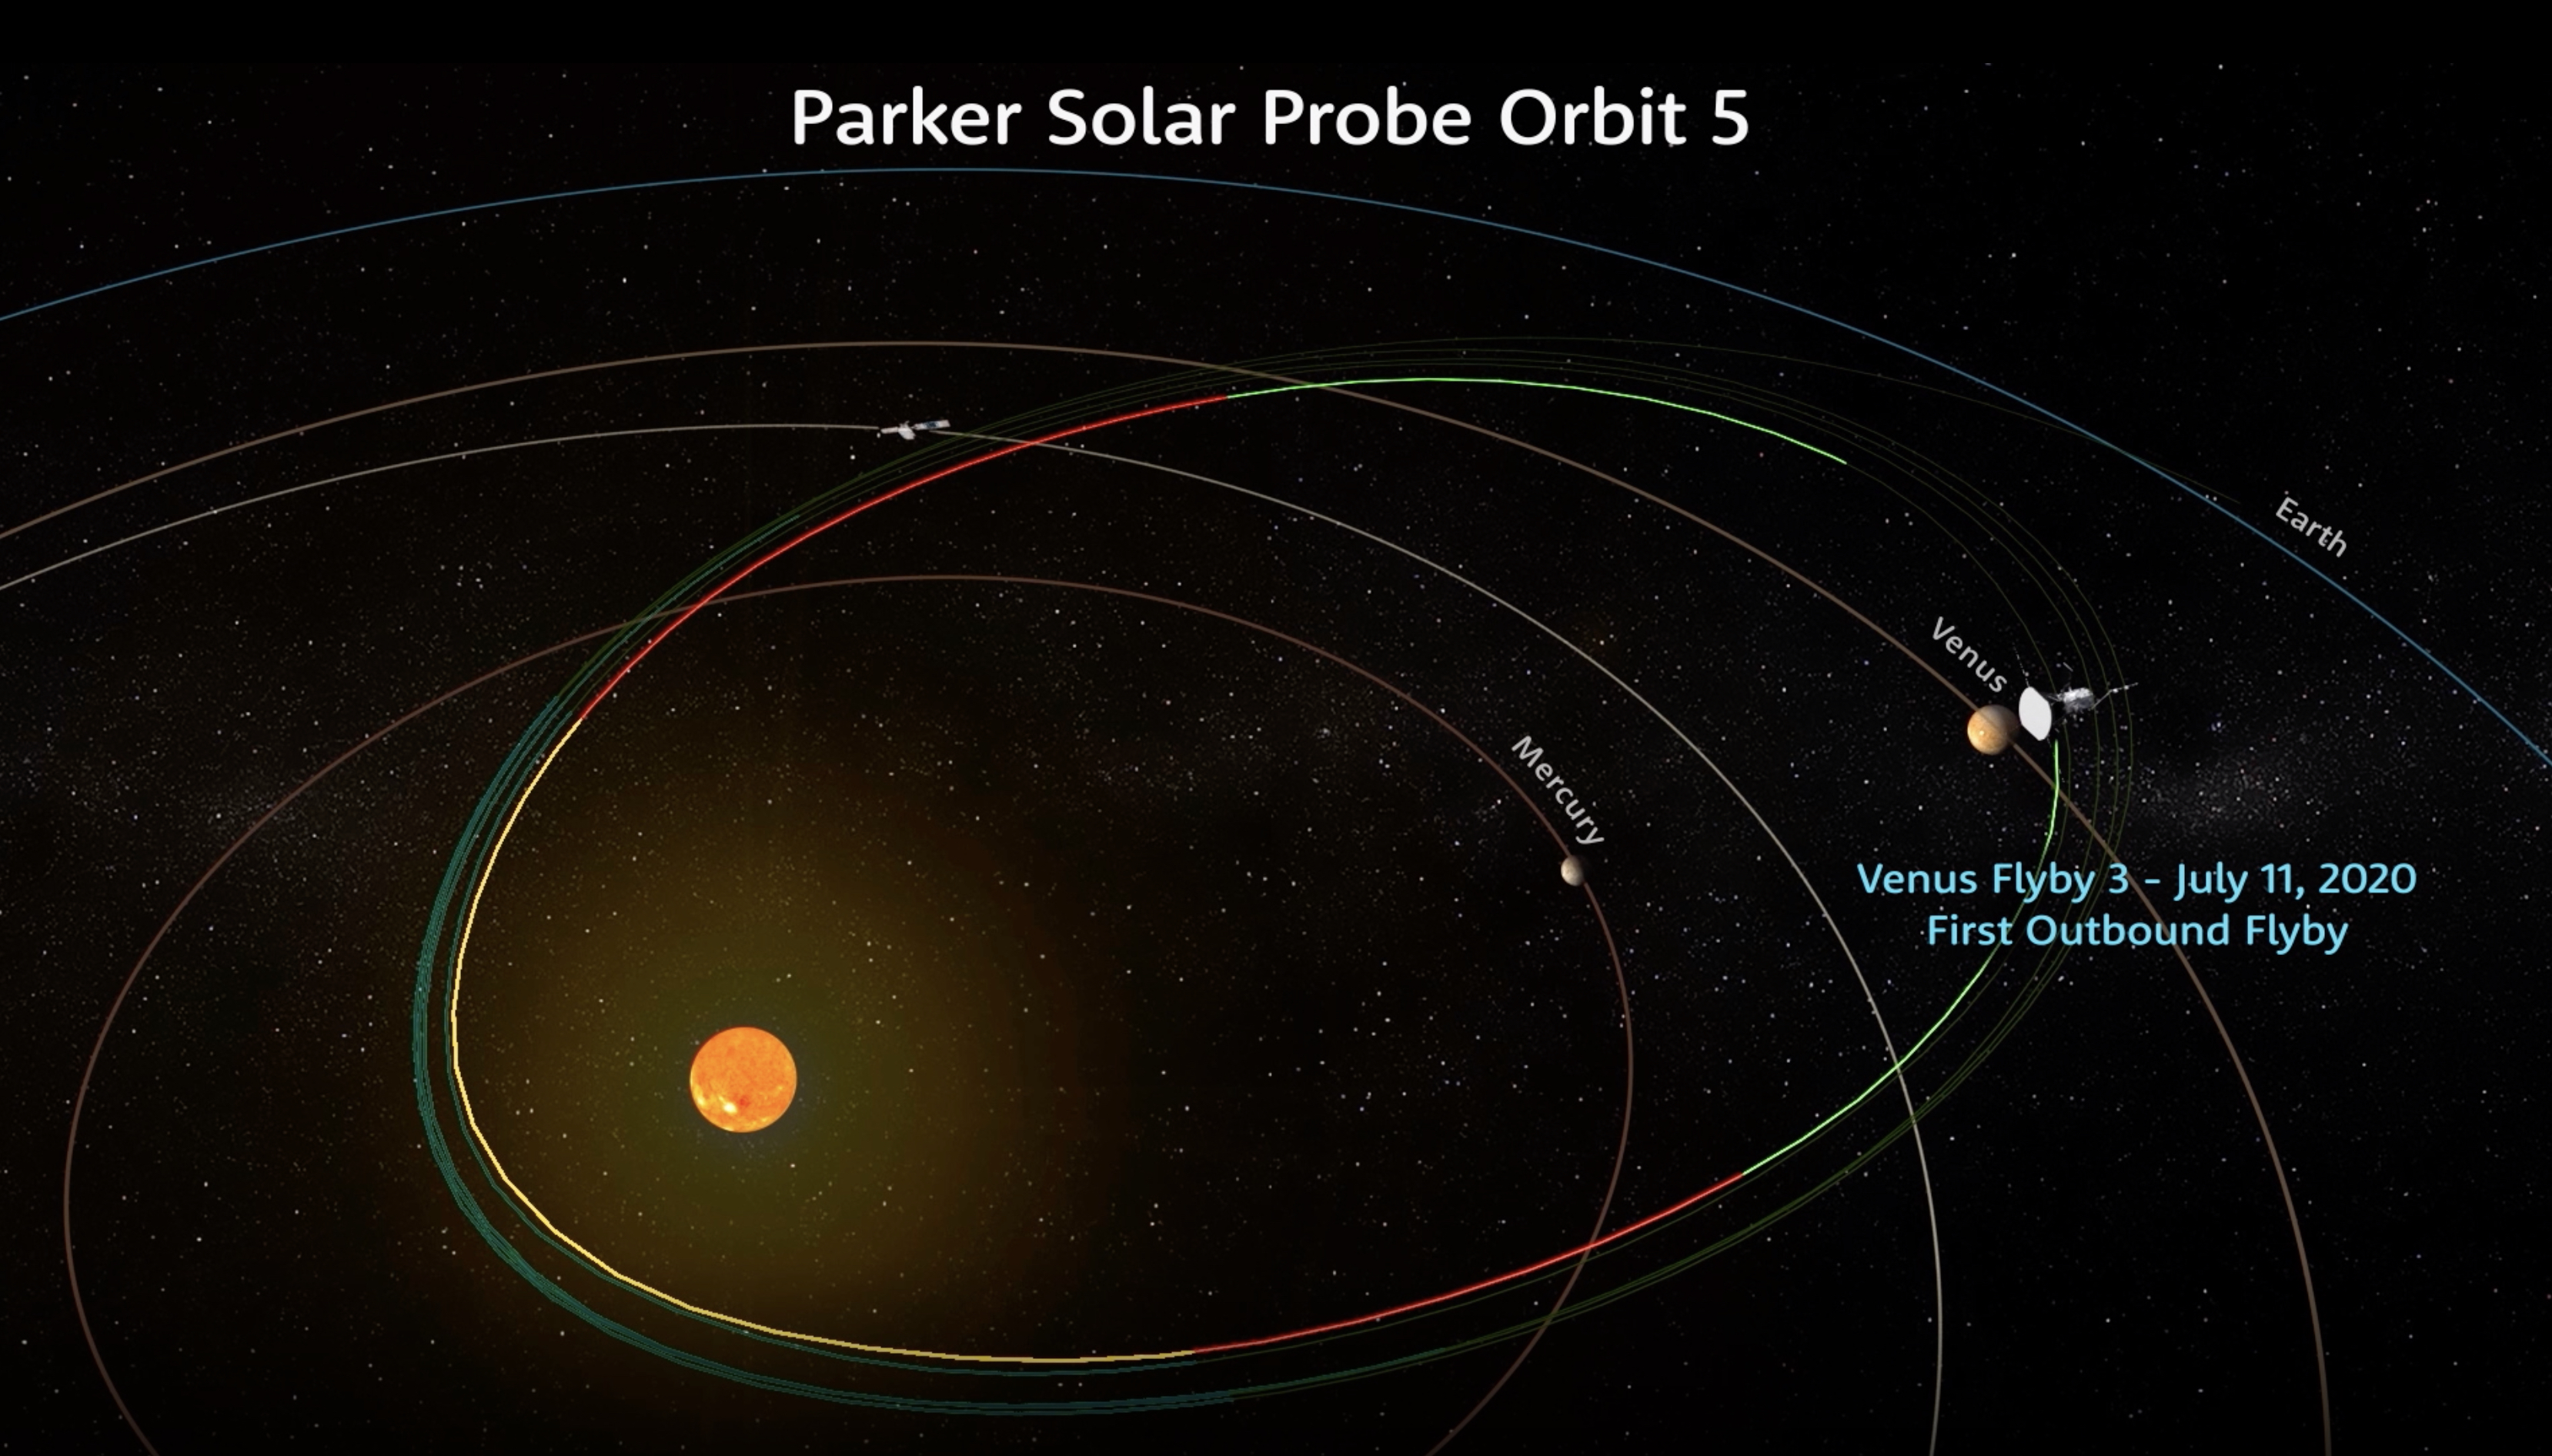 Early on July 11, 2020 (UTC), Parker Solar Probe will perform its first outbound flyby of Venus, passing approximately 516 miles above the surface as it curves around the planet. Such Venus gravity assists play an integral role in the Parker Solar Probe mission. The spacecraft relies on the planet to rid itself of orbital energy, which in turn allows it to travel ever closer to the Sun after each Venus flyby. The mission’s previous two Venus flybys swooped past the Sun-facing side of the planet, and this will be Parker Solar Probe’s first pass on Venus’ night side. 